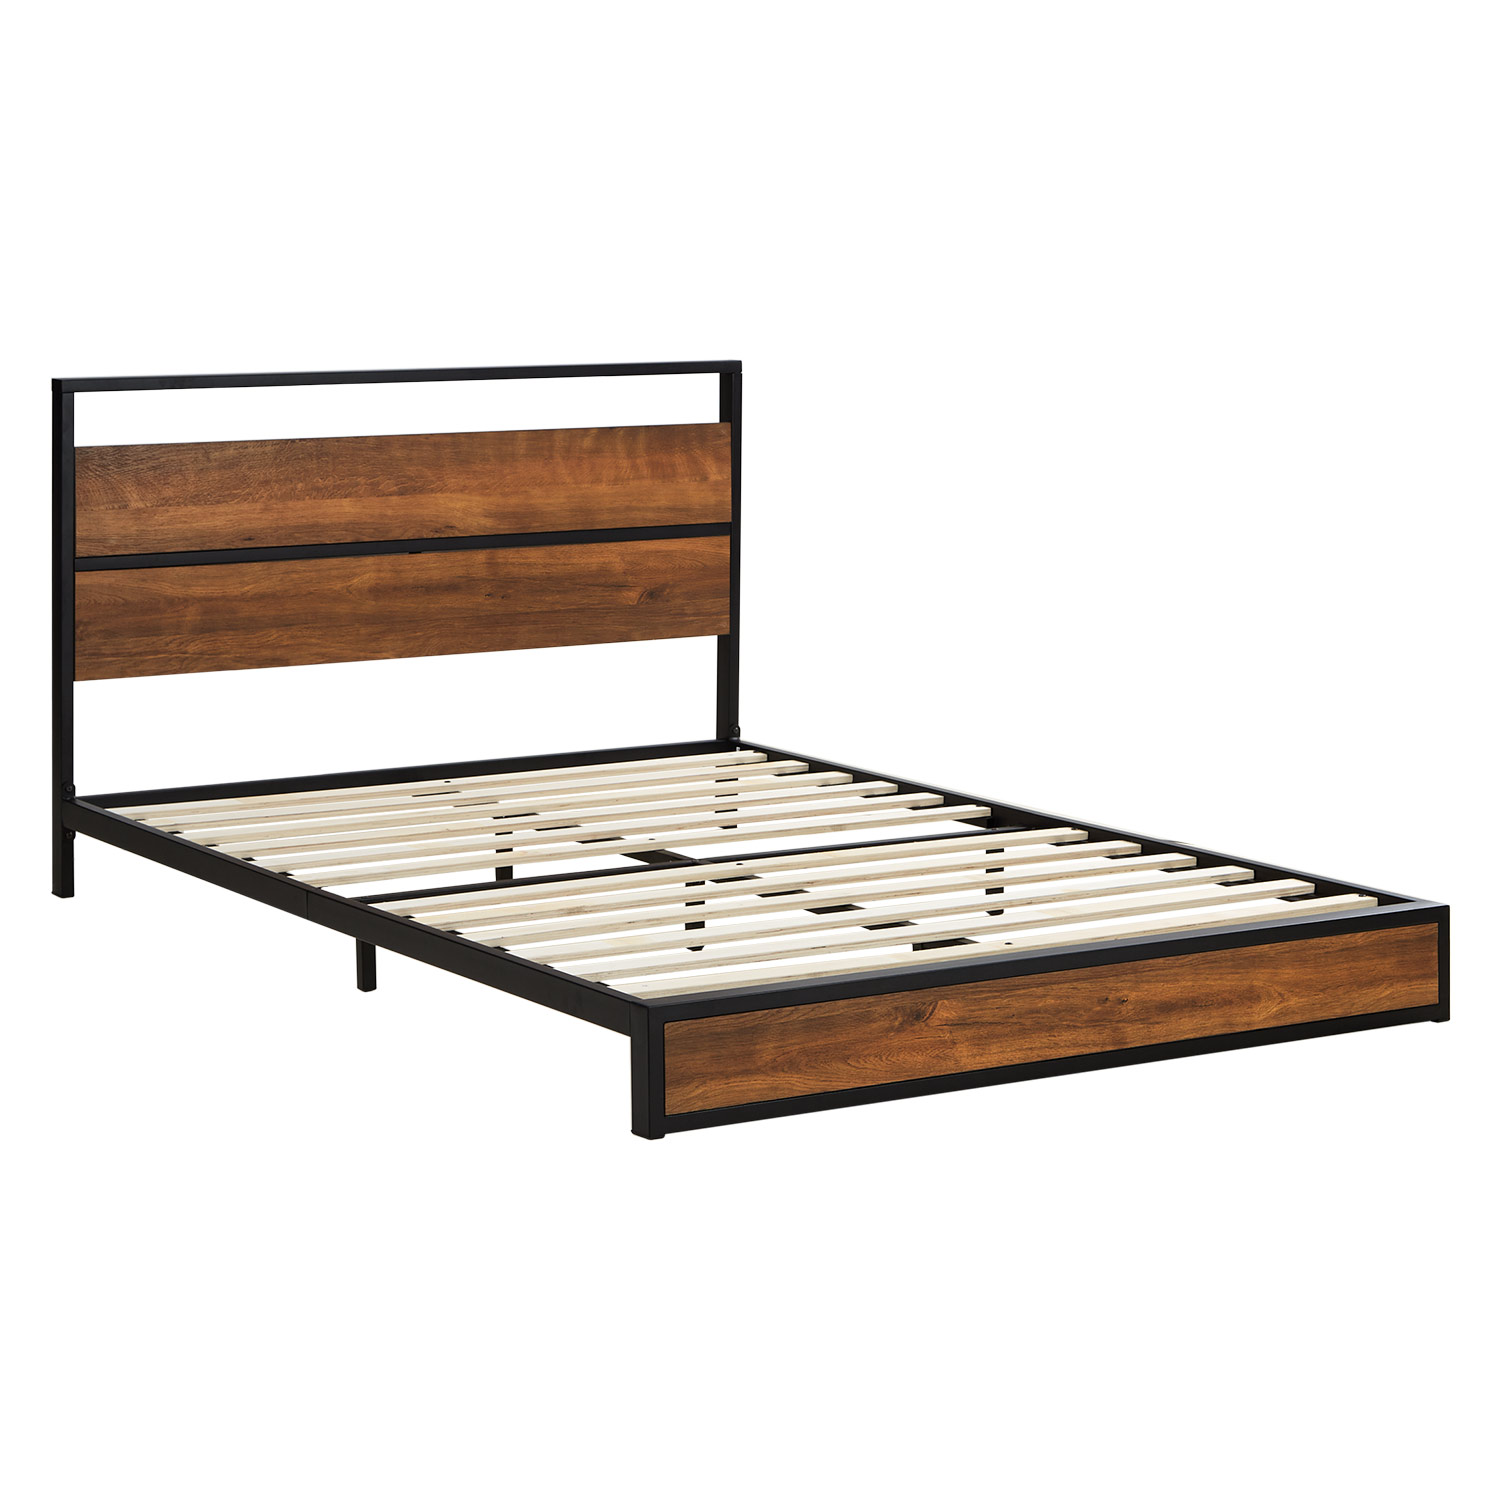 Solid Metal Bed with Mattress 140x200 cm Slatts Double Bed Black Futon Bed Wood Brown Platform Bed Frame Guest Bed 